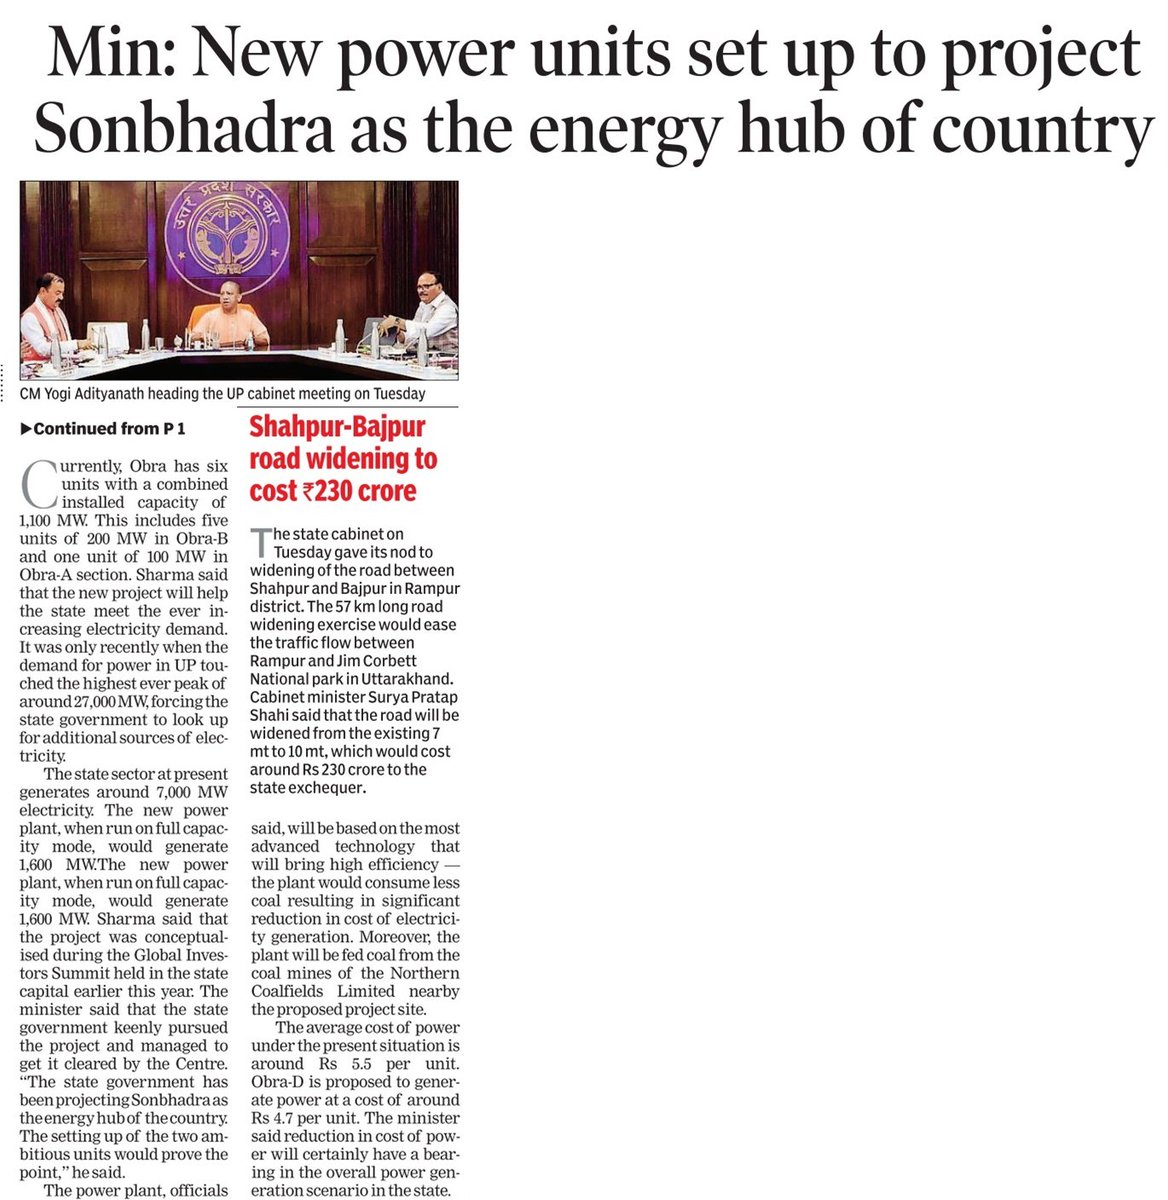 #UttarPradesh
#Cabinet nod to Obra-D plant; to add 1,600MW to UP’s power kitty

🔶1st Ultra-Super #Critical #Power Plant

🔶New power units set up to project #Sonbhadra as the #energy_hub of country

#InvestInUP #QualityPower